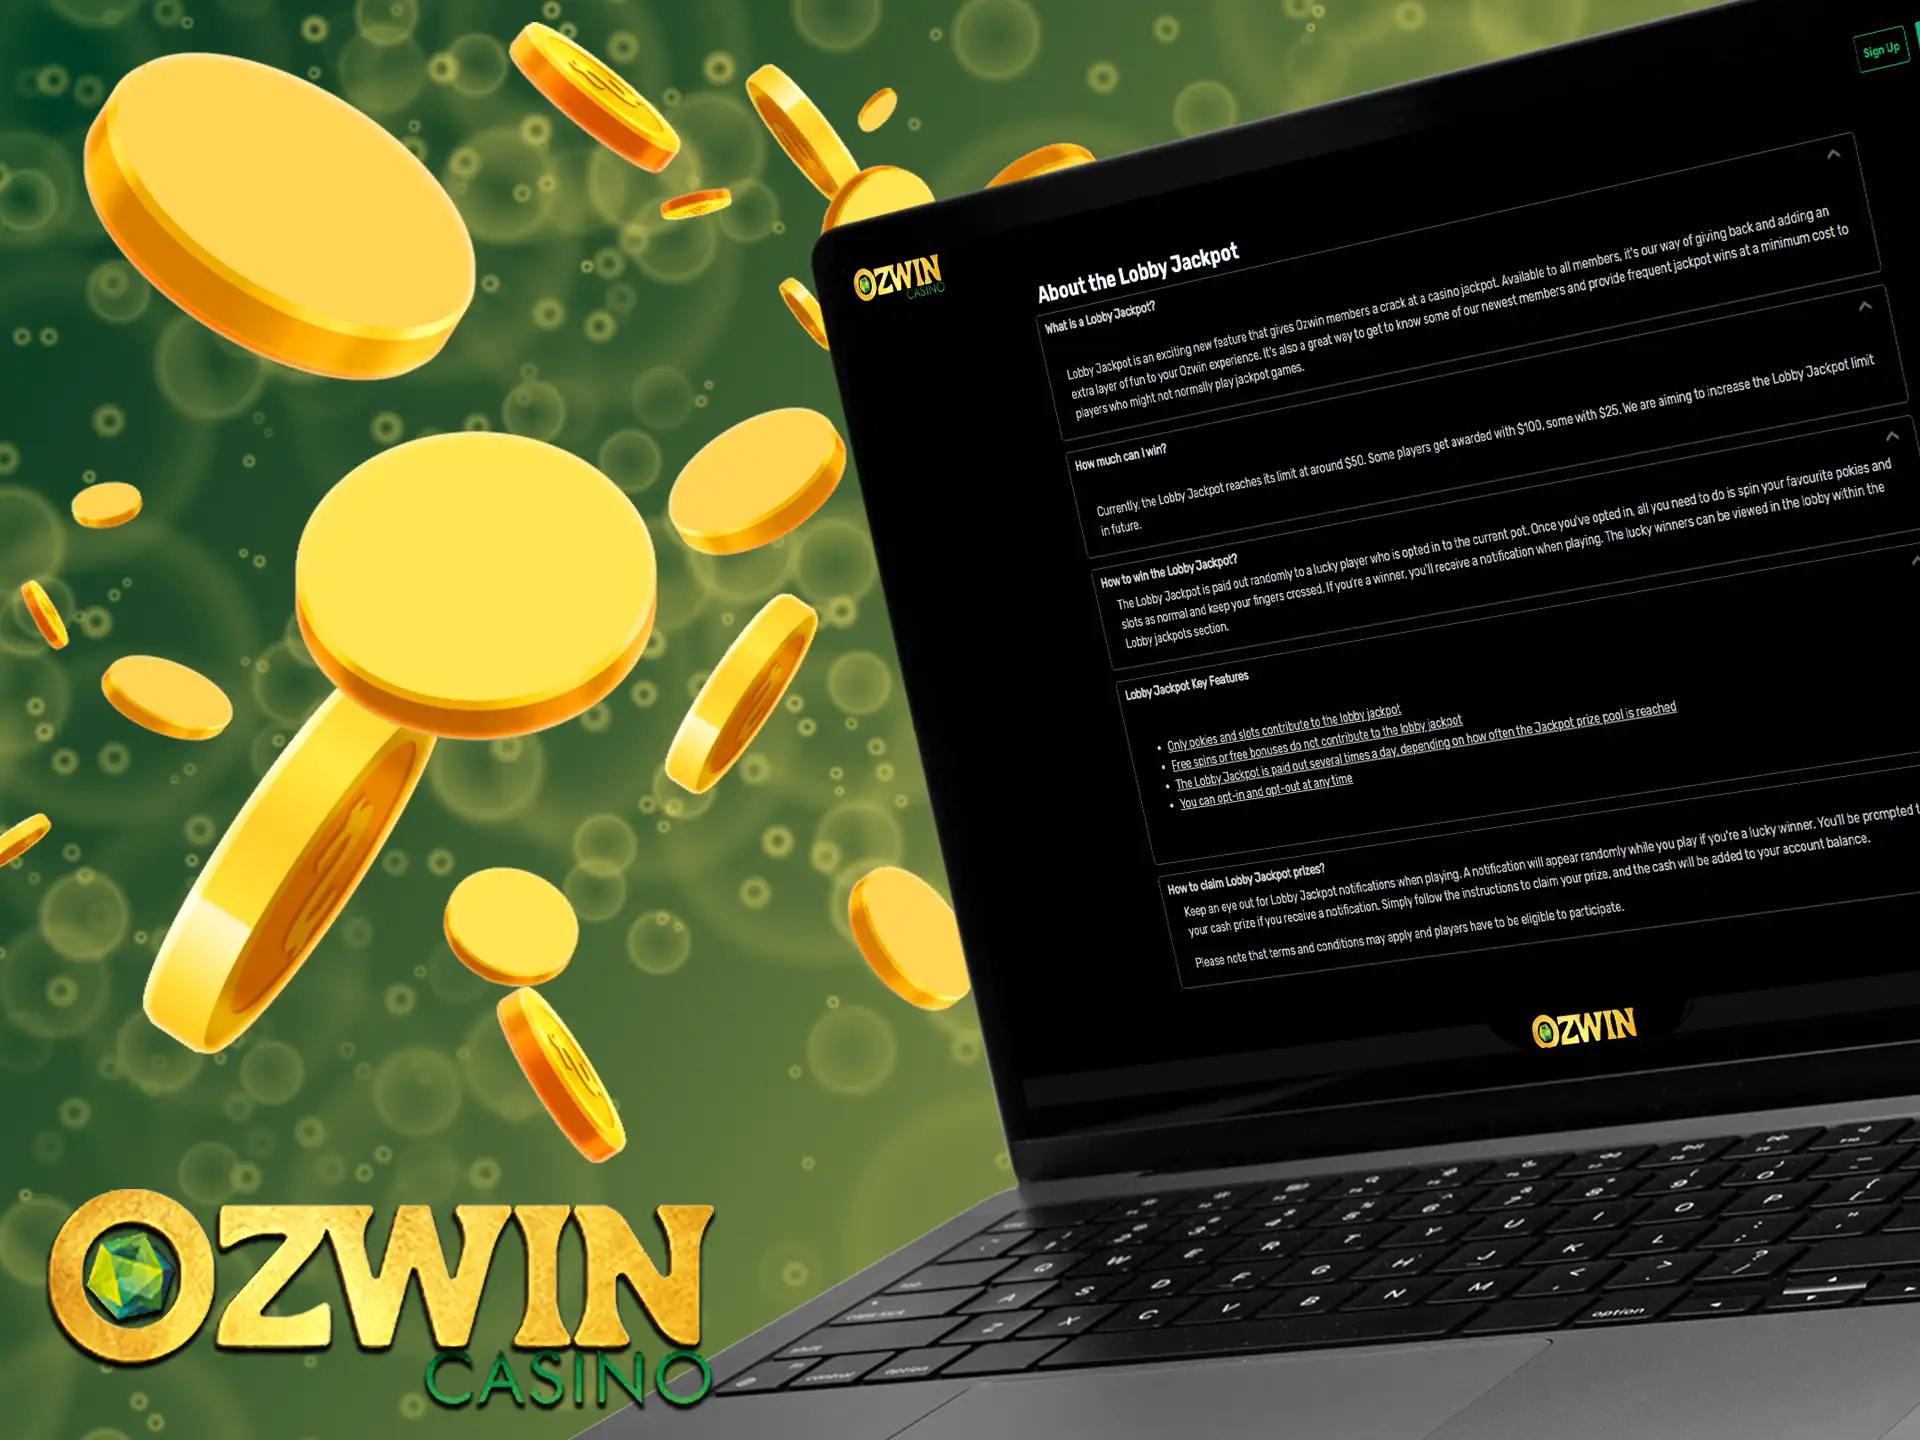 Try your luck at Ozwin's Lobby Jackpot for a chance to win a windfall!